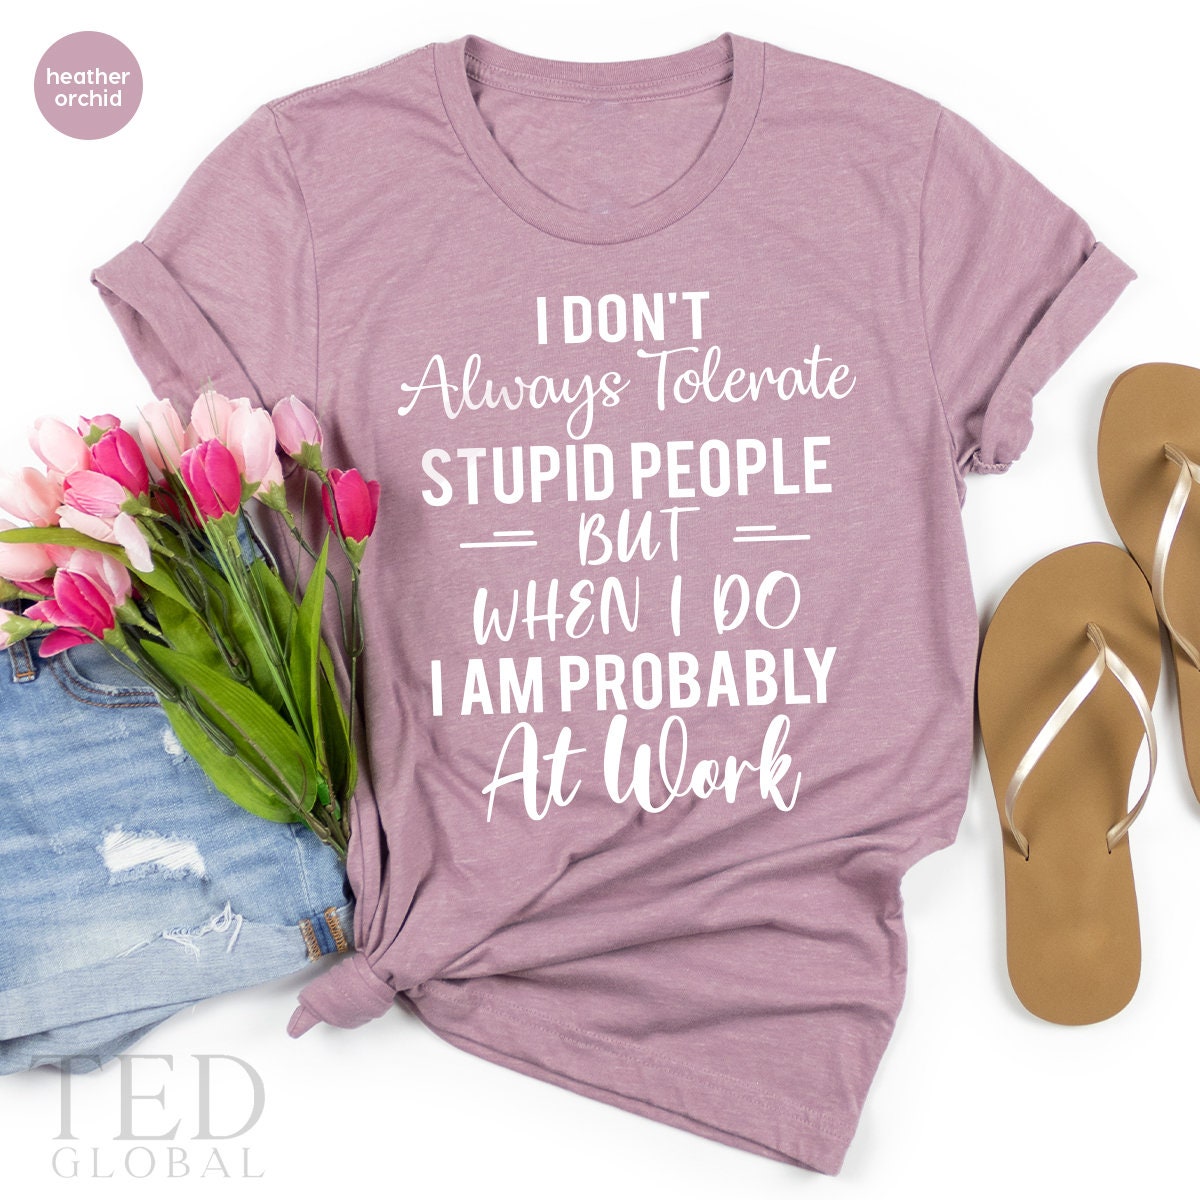 Sarcastic Co-Worker T-Shirt, Always Tolerate T Shirt, Funny Boss Gift, Collage Shirts, Employer TShirt, Funny Work Tees, Stupid People Tee - Fastdeliverytees.com